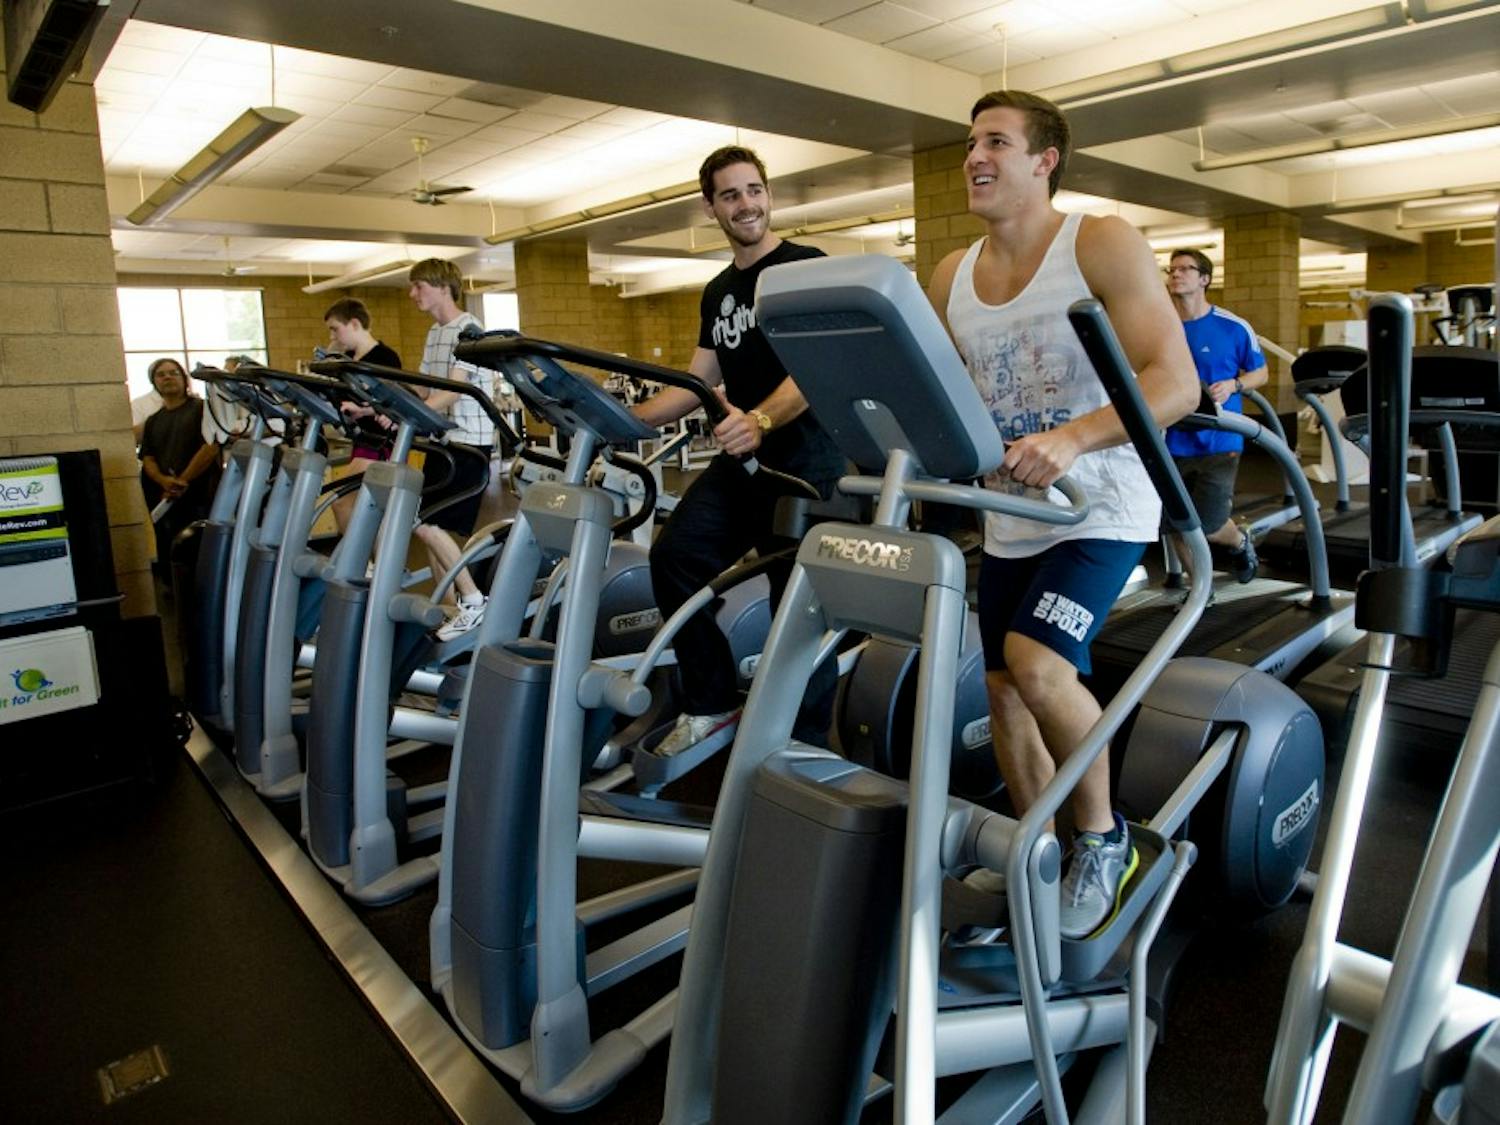 Instructor Kevin Brostoff, left, and student Jared Olivo generate electricity as they workout on elliptical trainers at at the Anteater Recreation Center at the University of California, Irvine, on January 20, 2012. Using gym equipment, Fit for Green makes a game out of the creation of renewable energy in the gym, using social media as a platform. (Paul Rodriguez/Orange County Register/MCT)